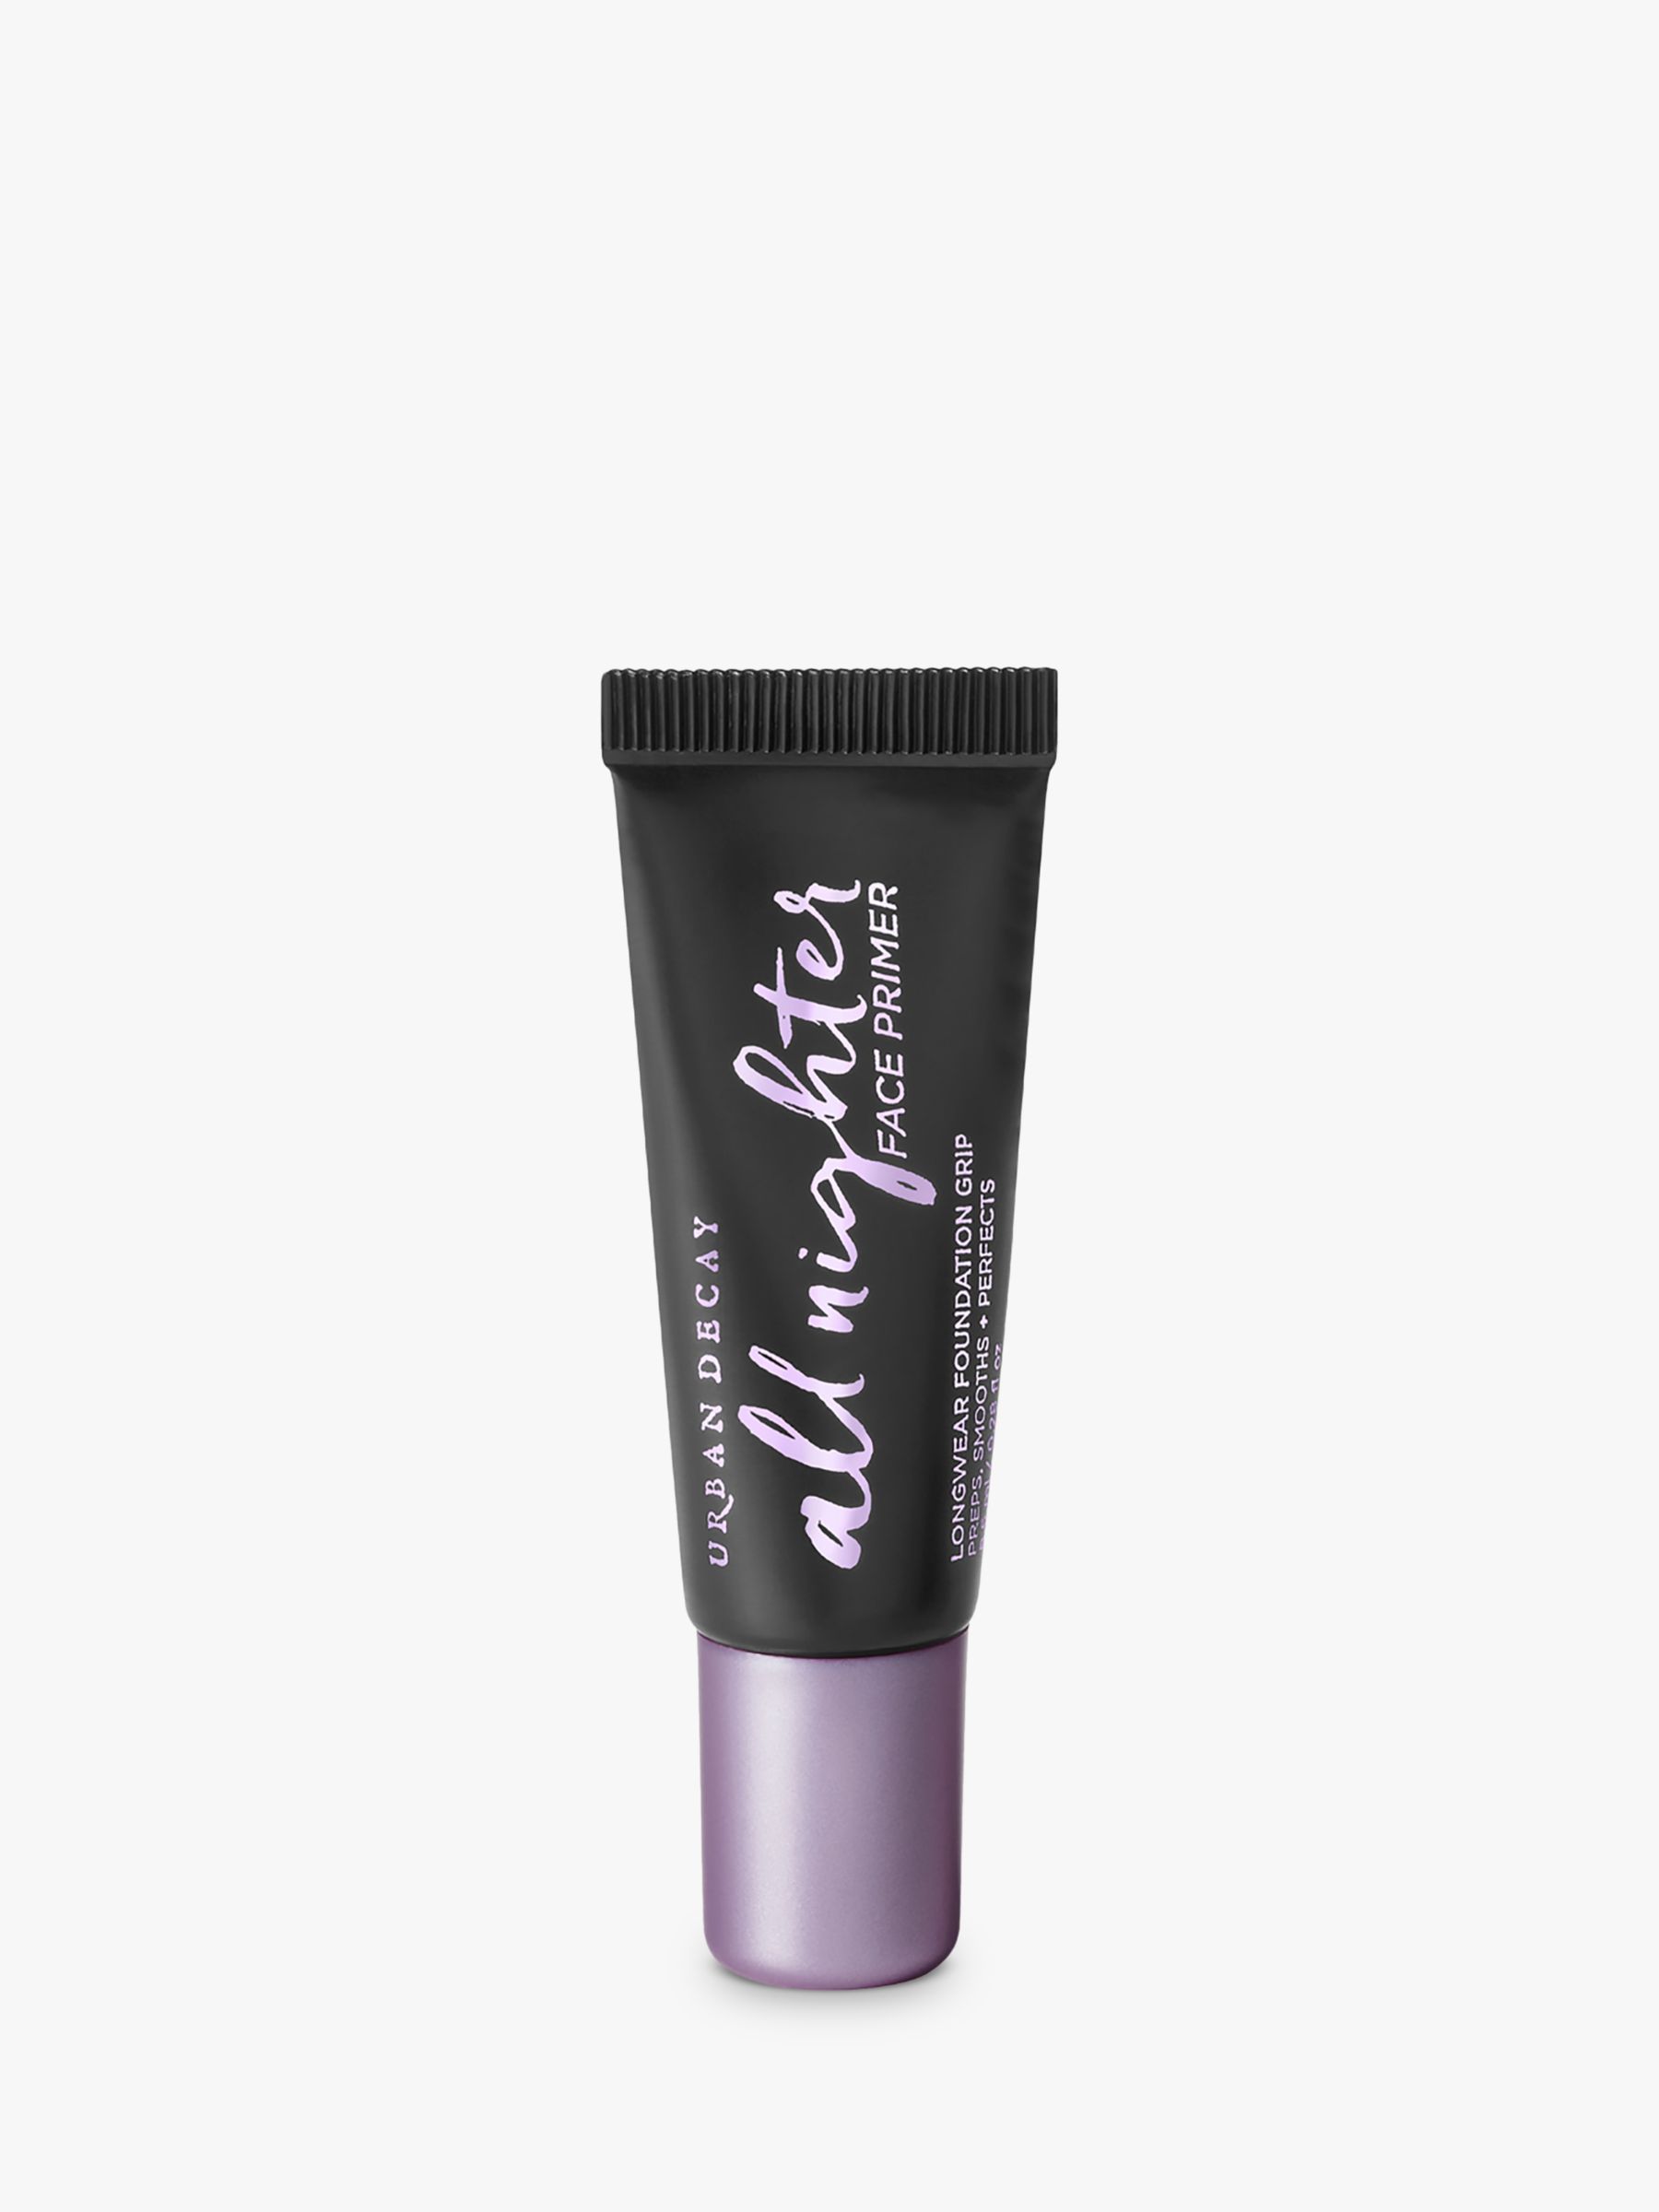 Urban Decay All Nighter Face Primer Travel Size, 8.5ml 1